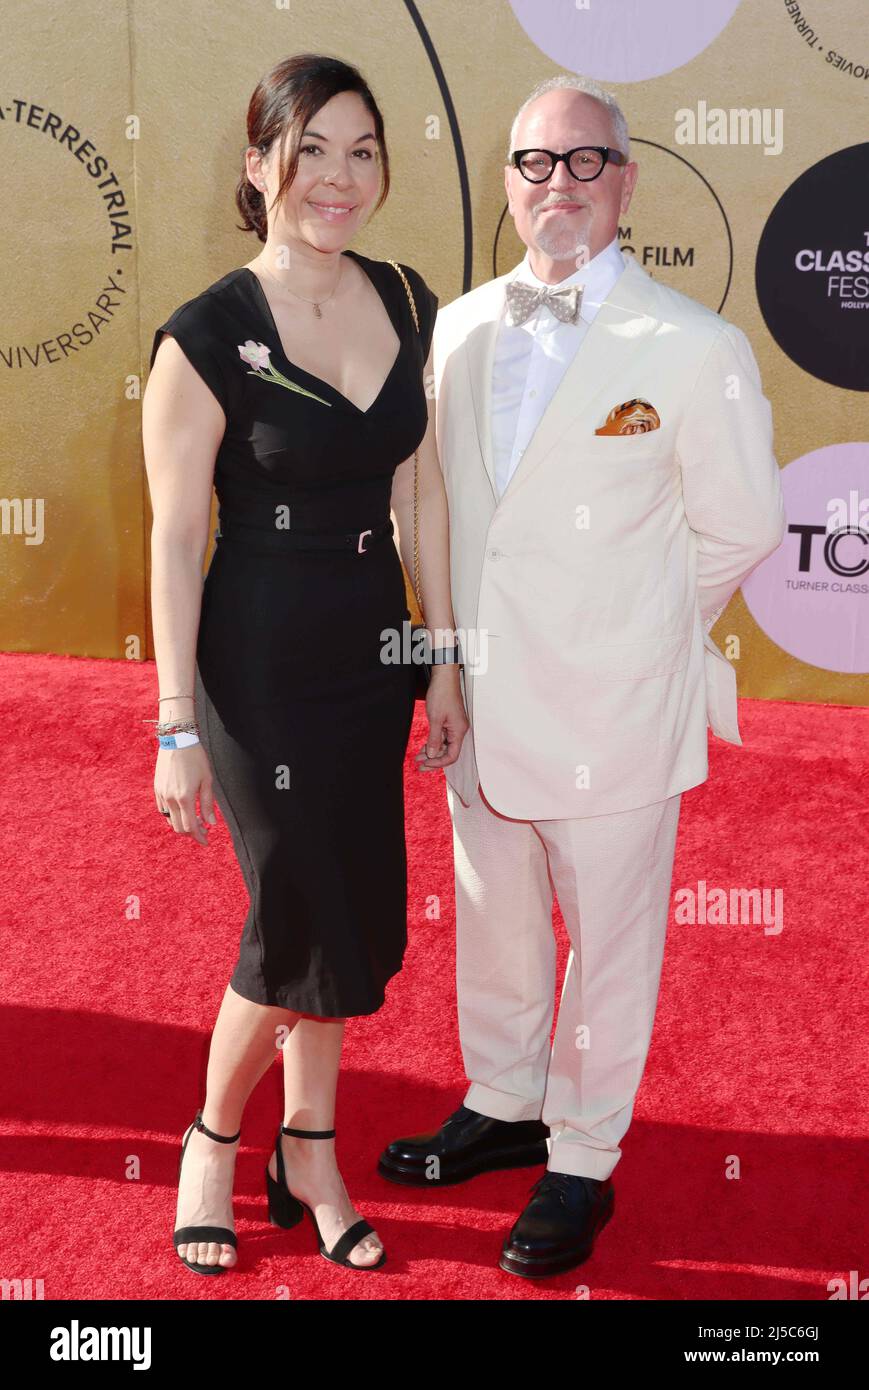 Los Angeles, USA. 21st Apr, 2022. William Joyce, Hillary Joyce 2022/04/21 The 40th Anniversary Screening of “E.T. the Extra-Terrestrial” held at TCL Chinese Theatre in Hollywood, CA, Credit: Cronos/Alamy Live News Stock Photo